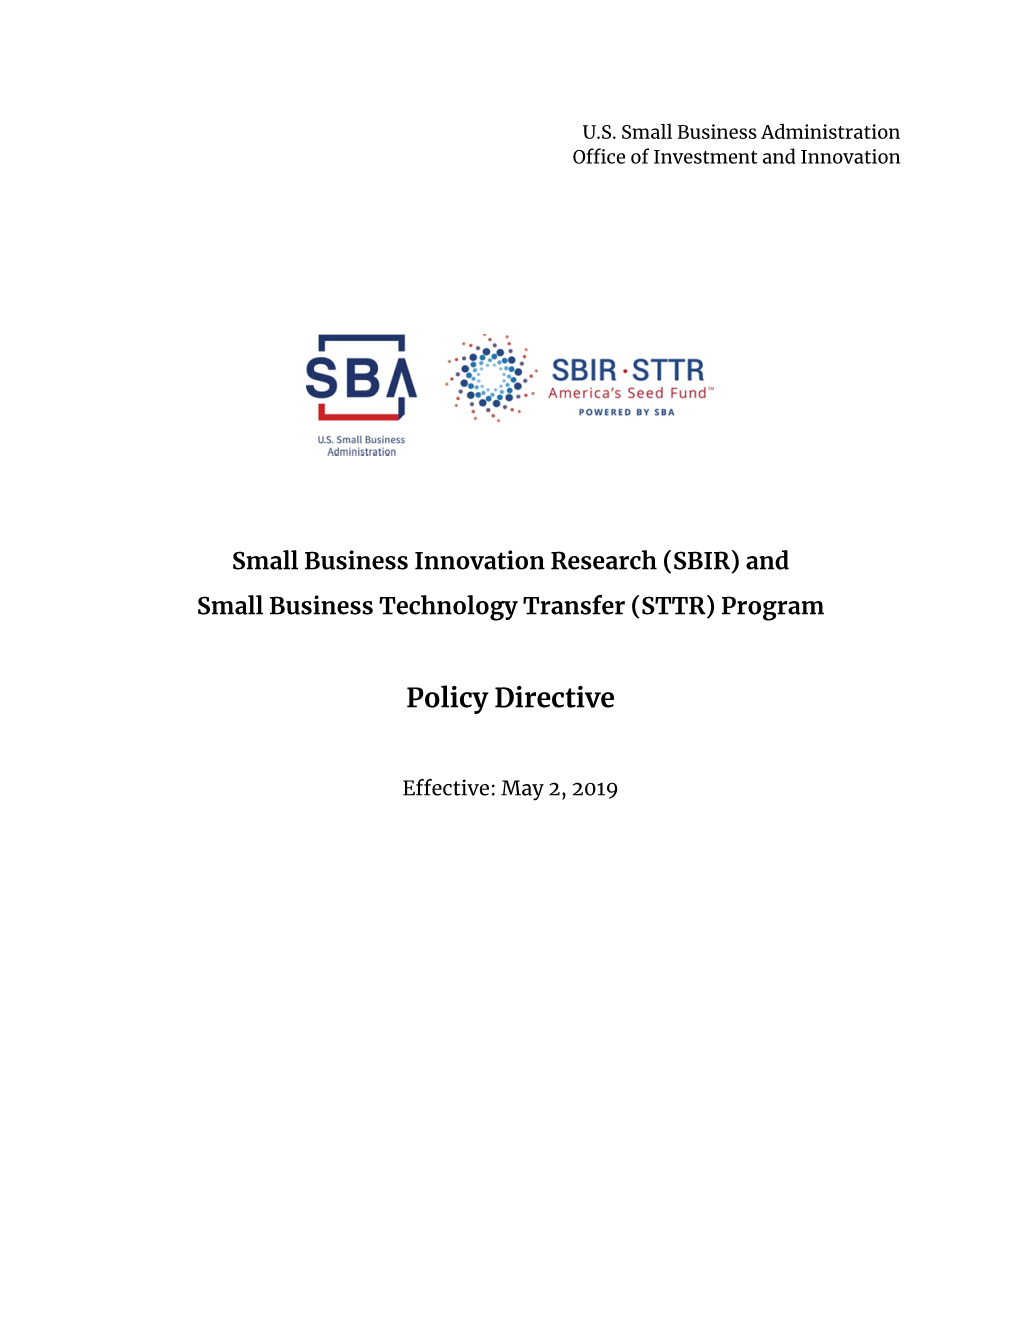 STTR Policy Directive Filed by SBA